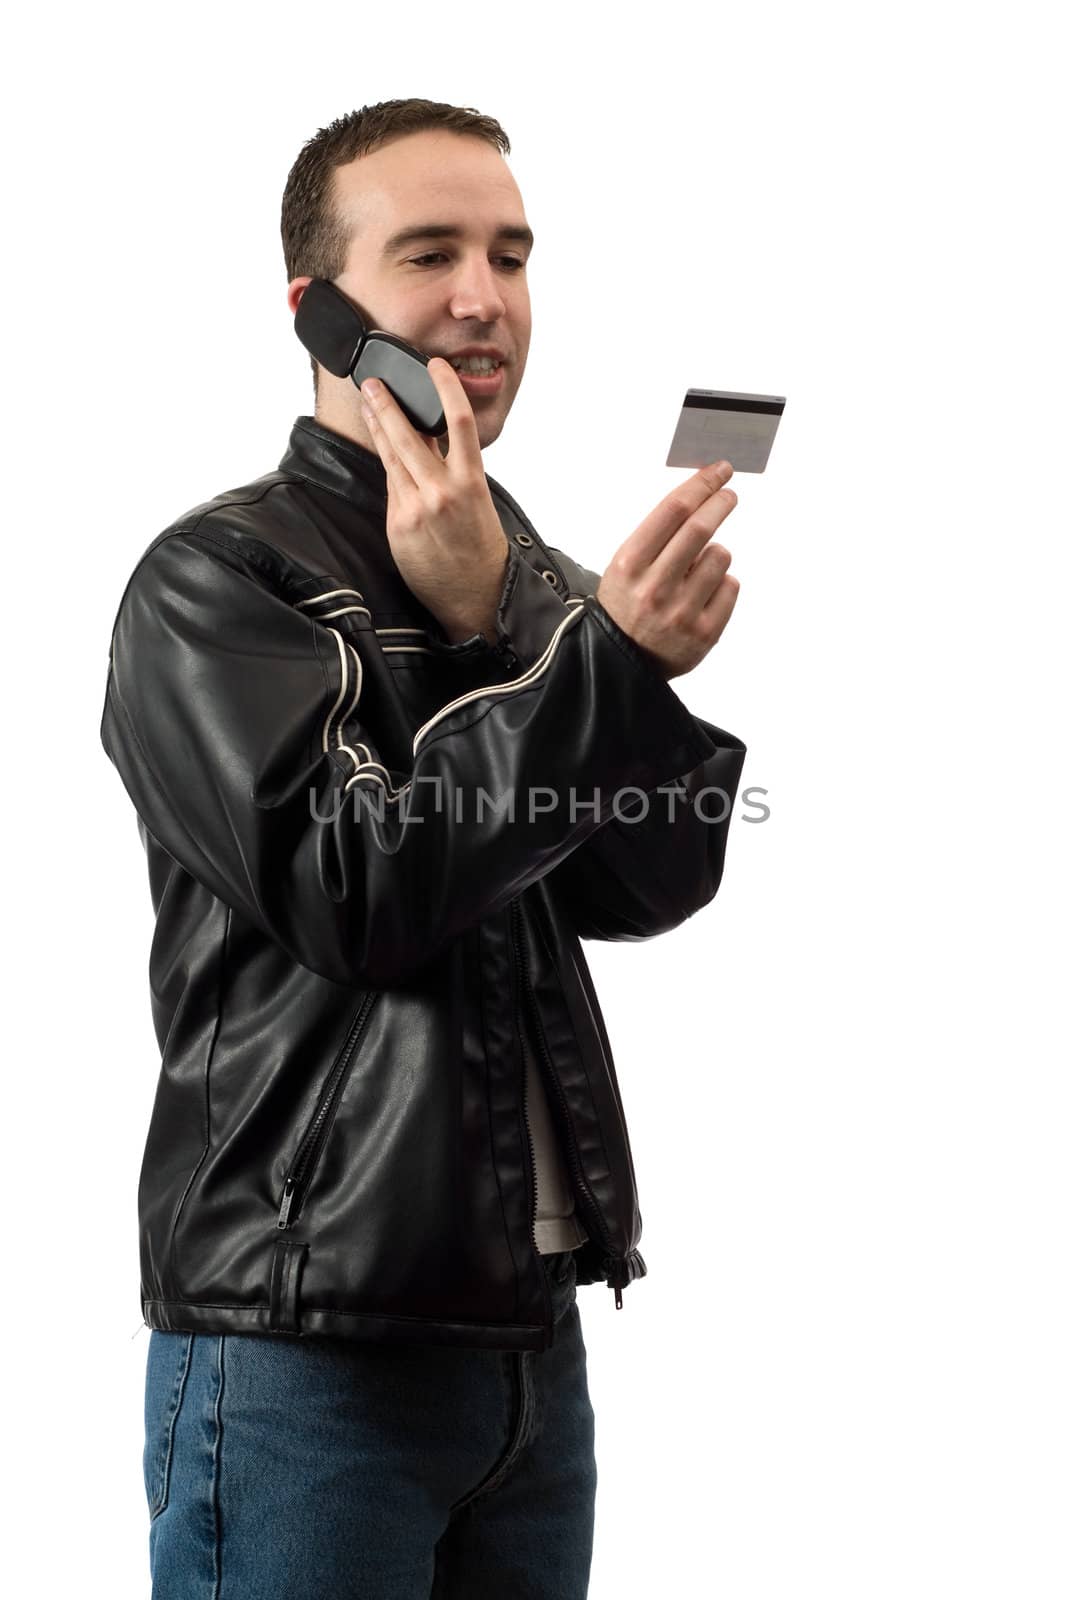 A young man doing some telephone banking and giving the bank his debit card number, isolated against a white background